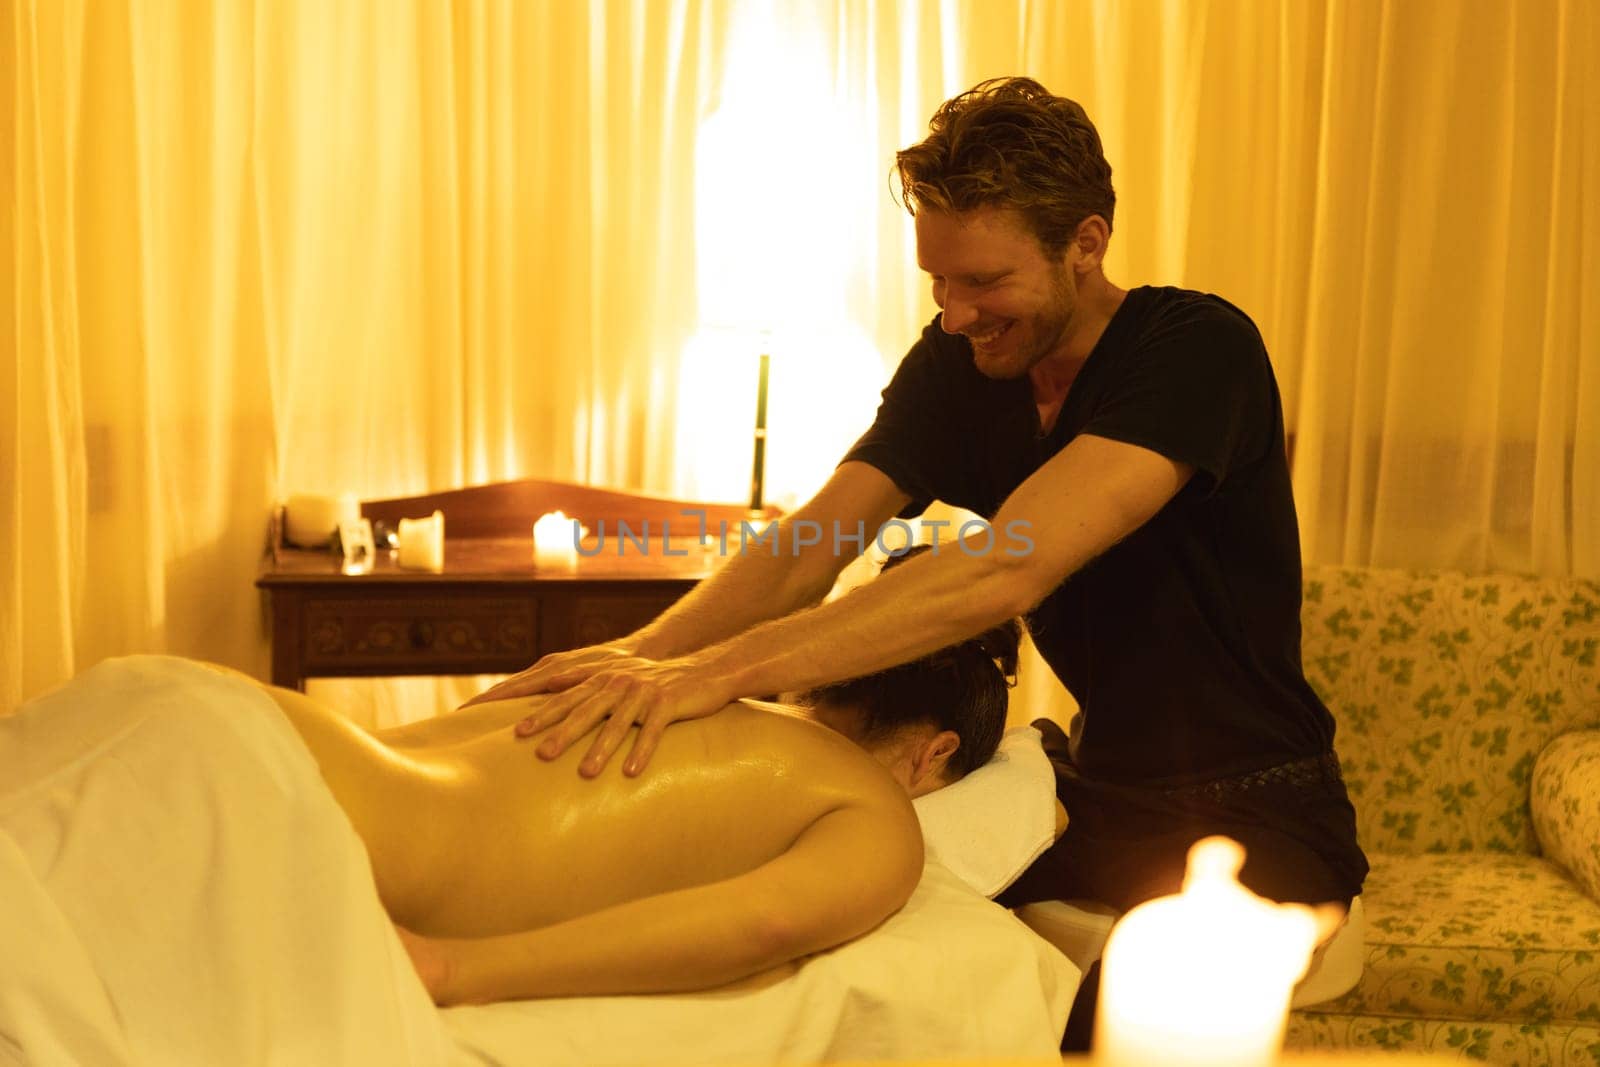 Massage session in SPA salon - smiling man massaging bare back of a woman. Mid shot